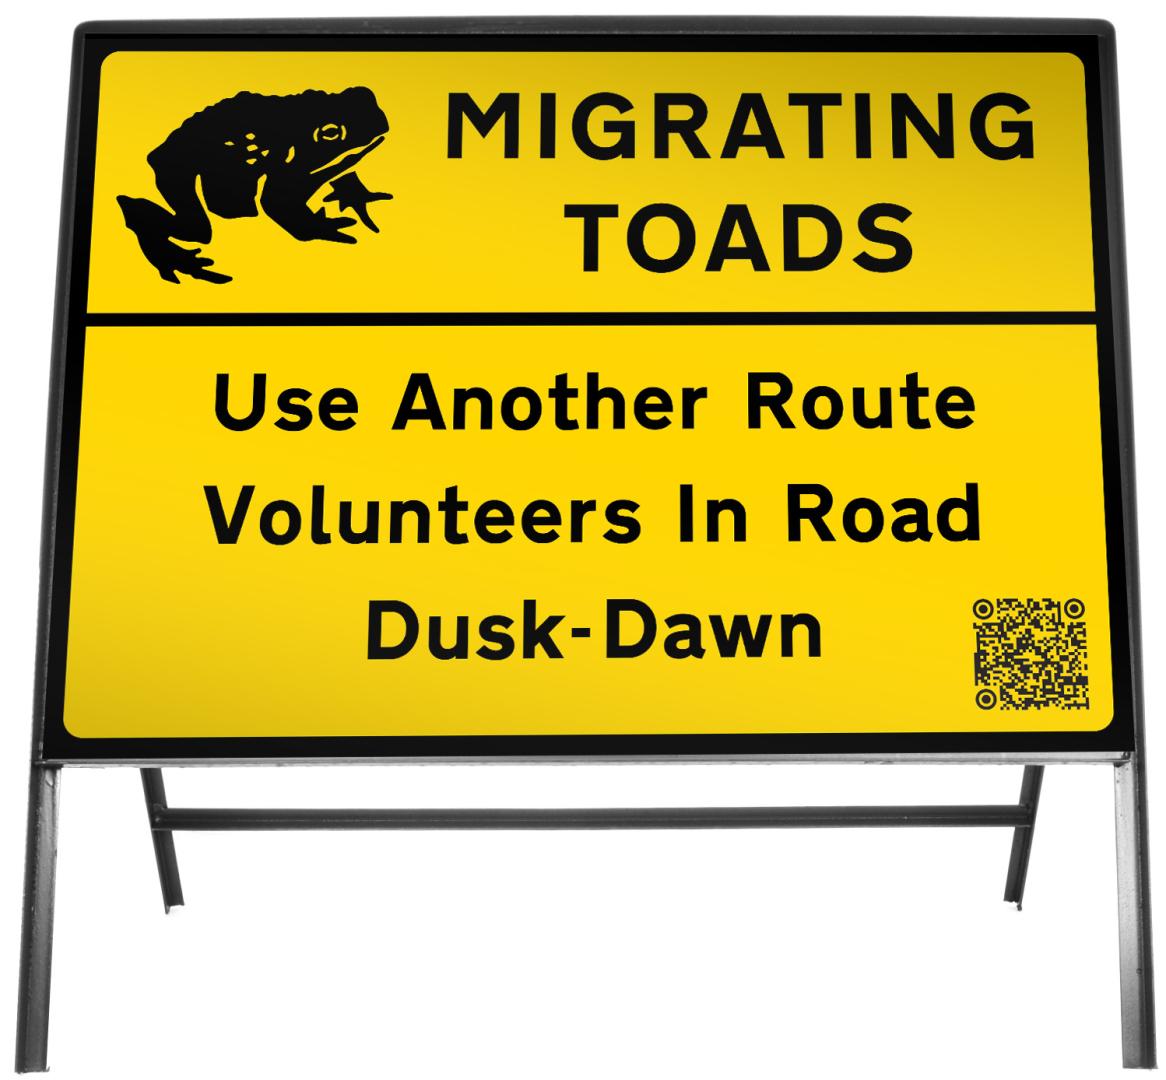 A photo of a road sign which reads migrating toads use another route volunteers in road dawn to dusk.